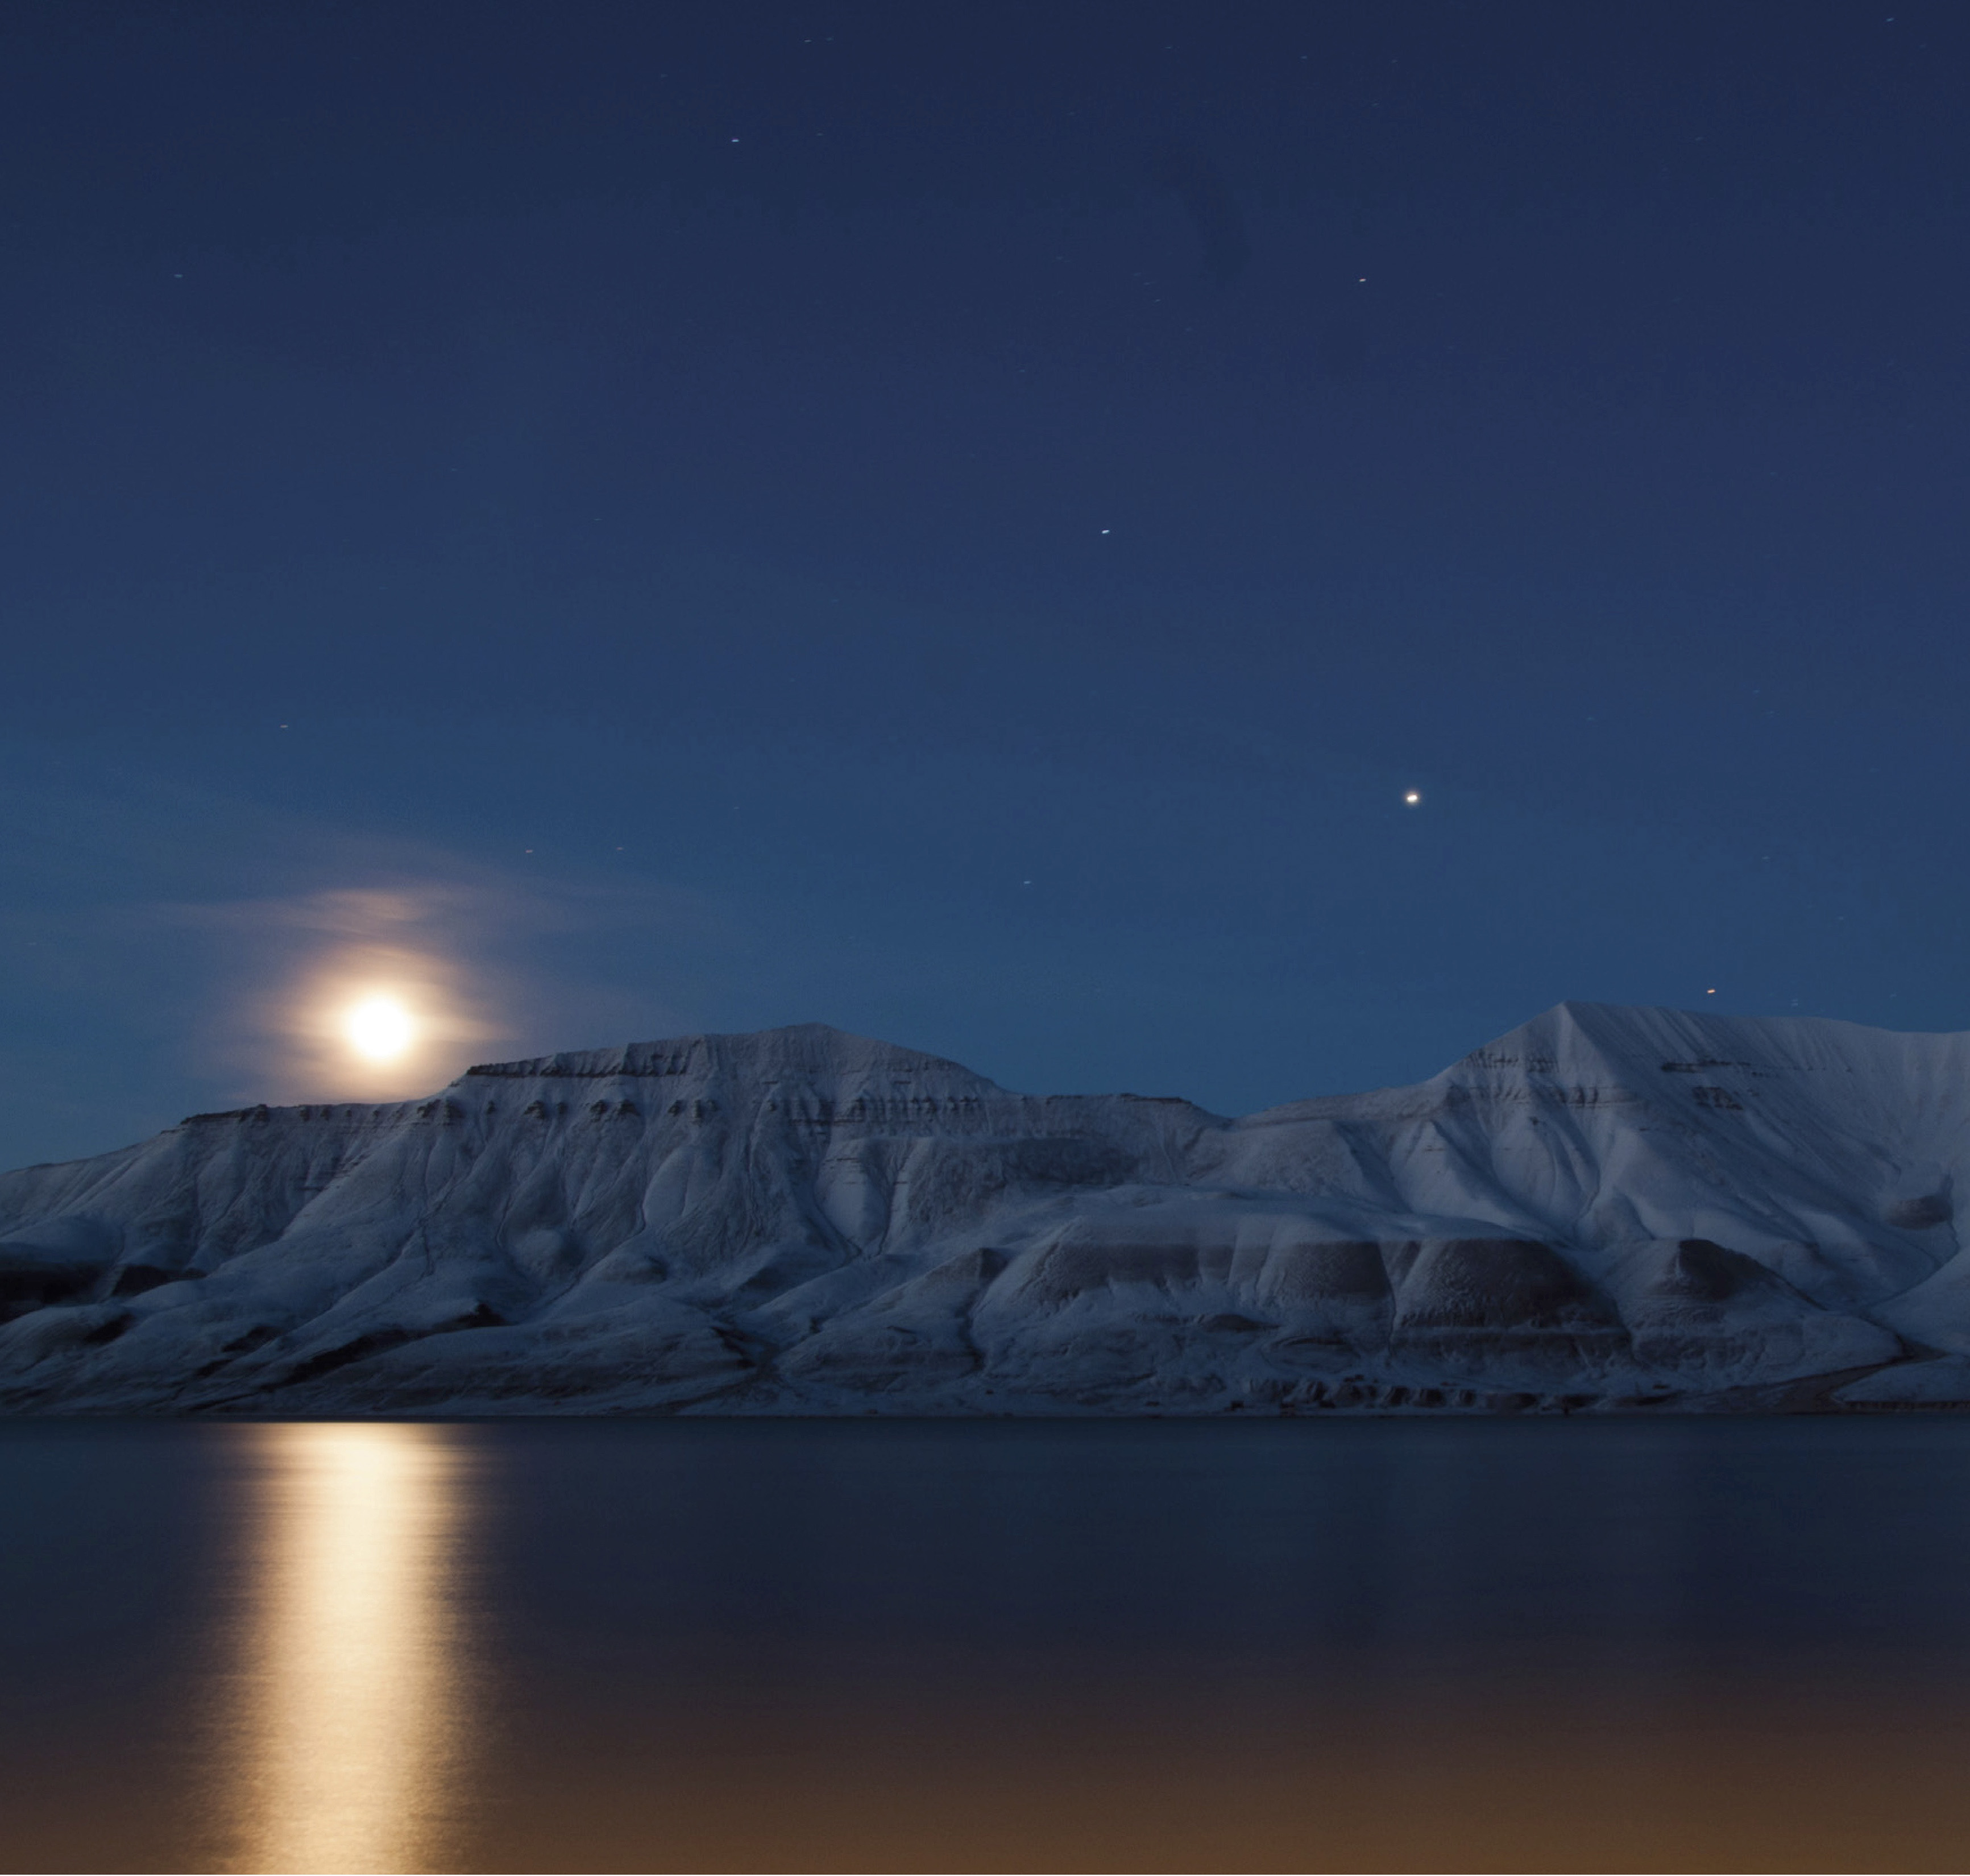 Located not far from the North Pole on the island of Spitsbergen, the Svalbard Global Seed Vault safeguards the agricultural plant collections of more than 230 countries. (Mari Tefre / Prospecta Press)